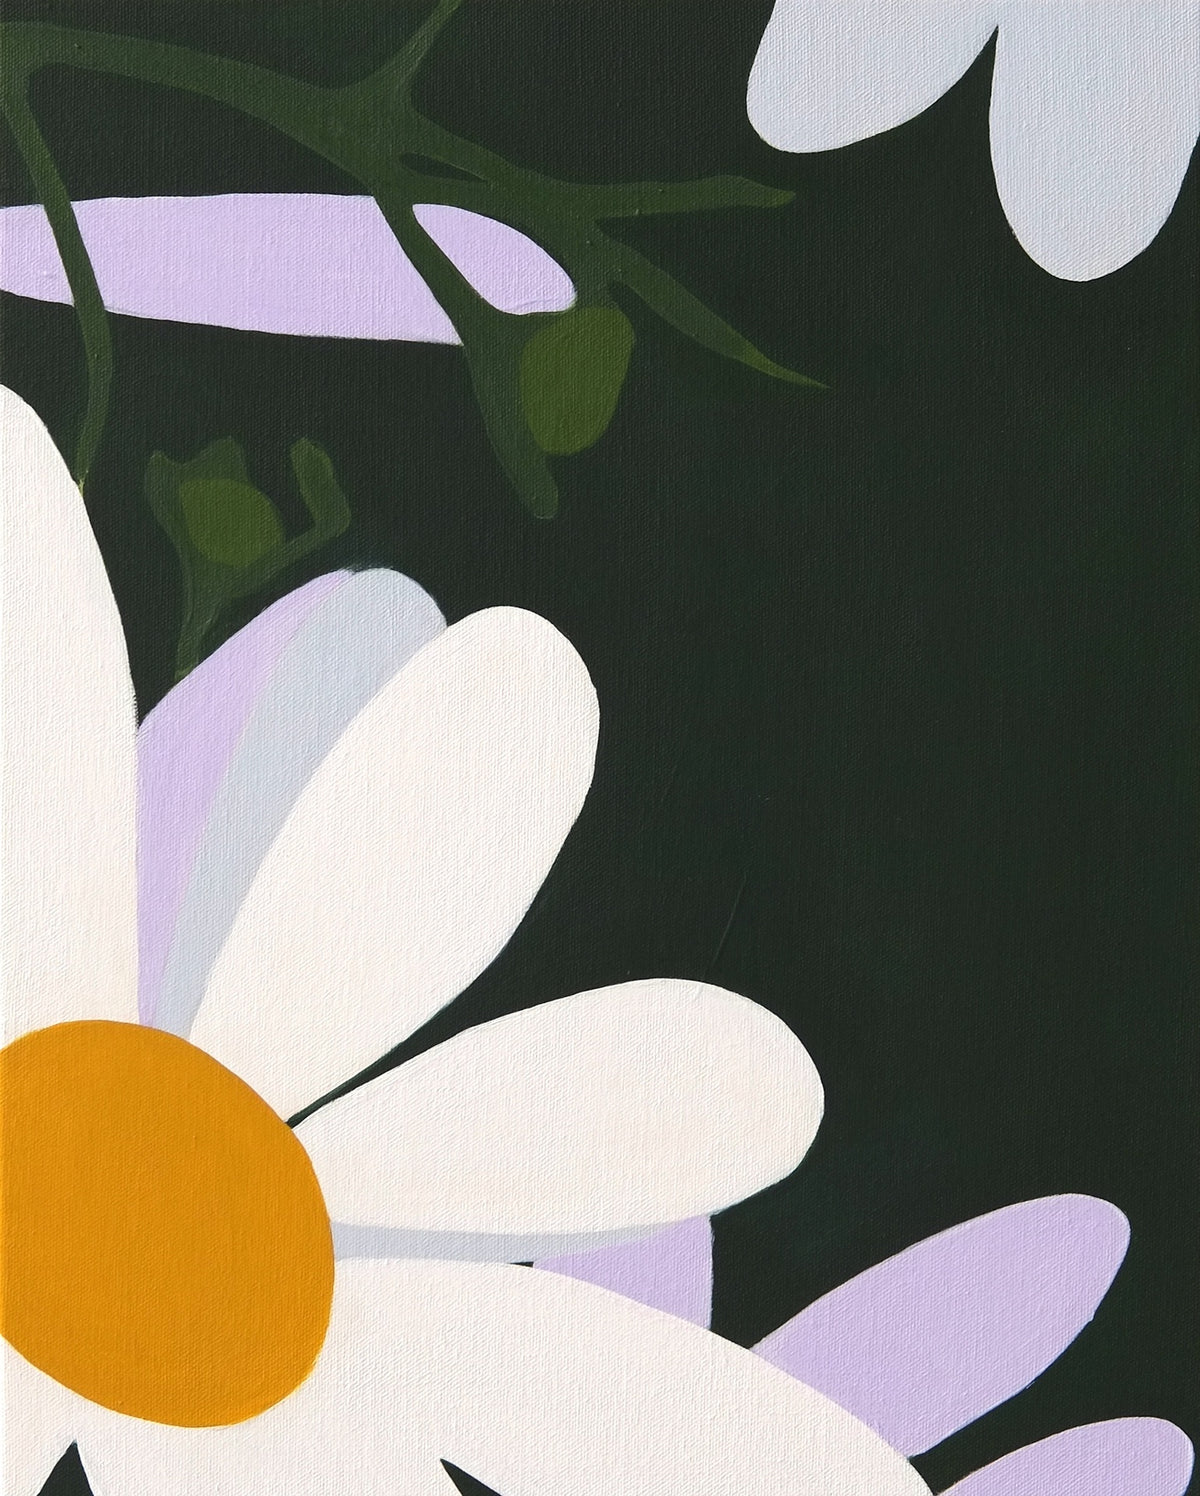 Swan River Daisy (D.T. Brown)